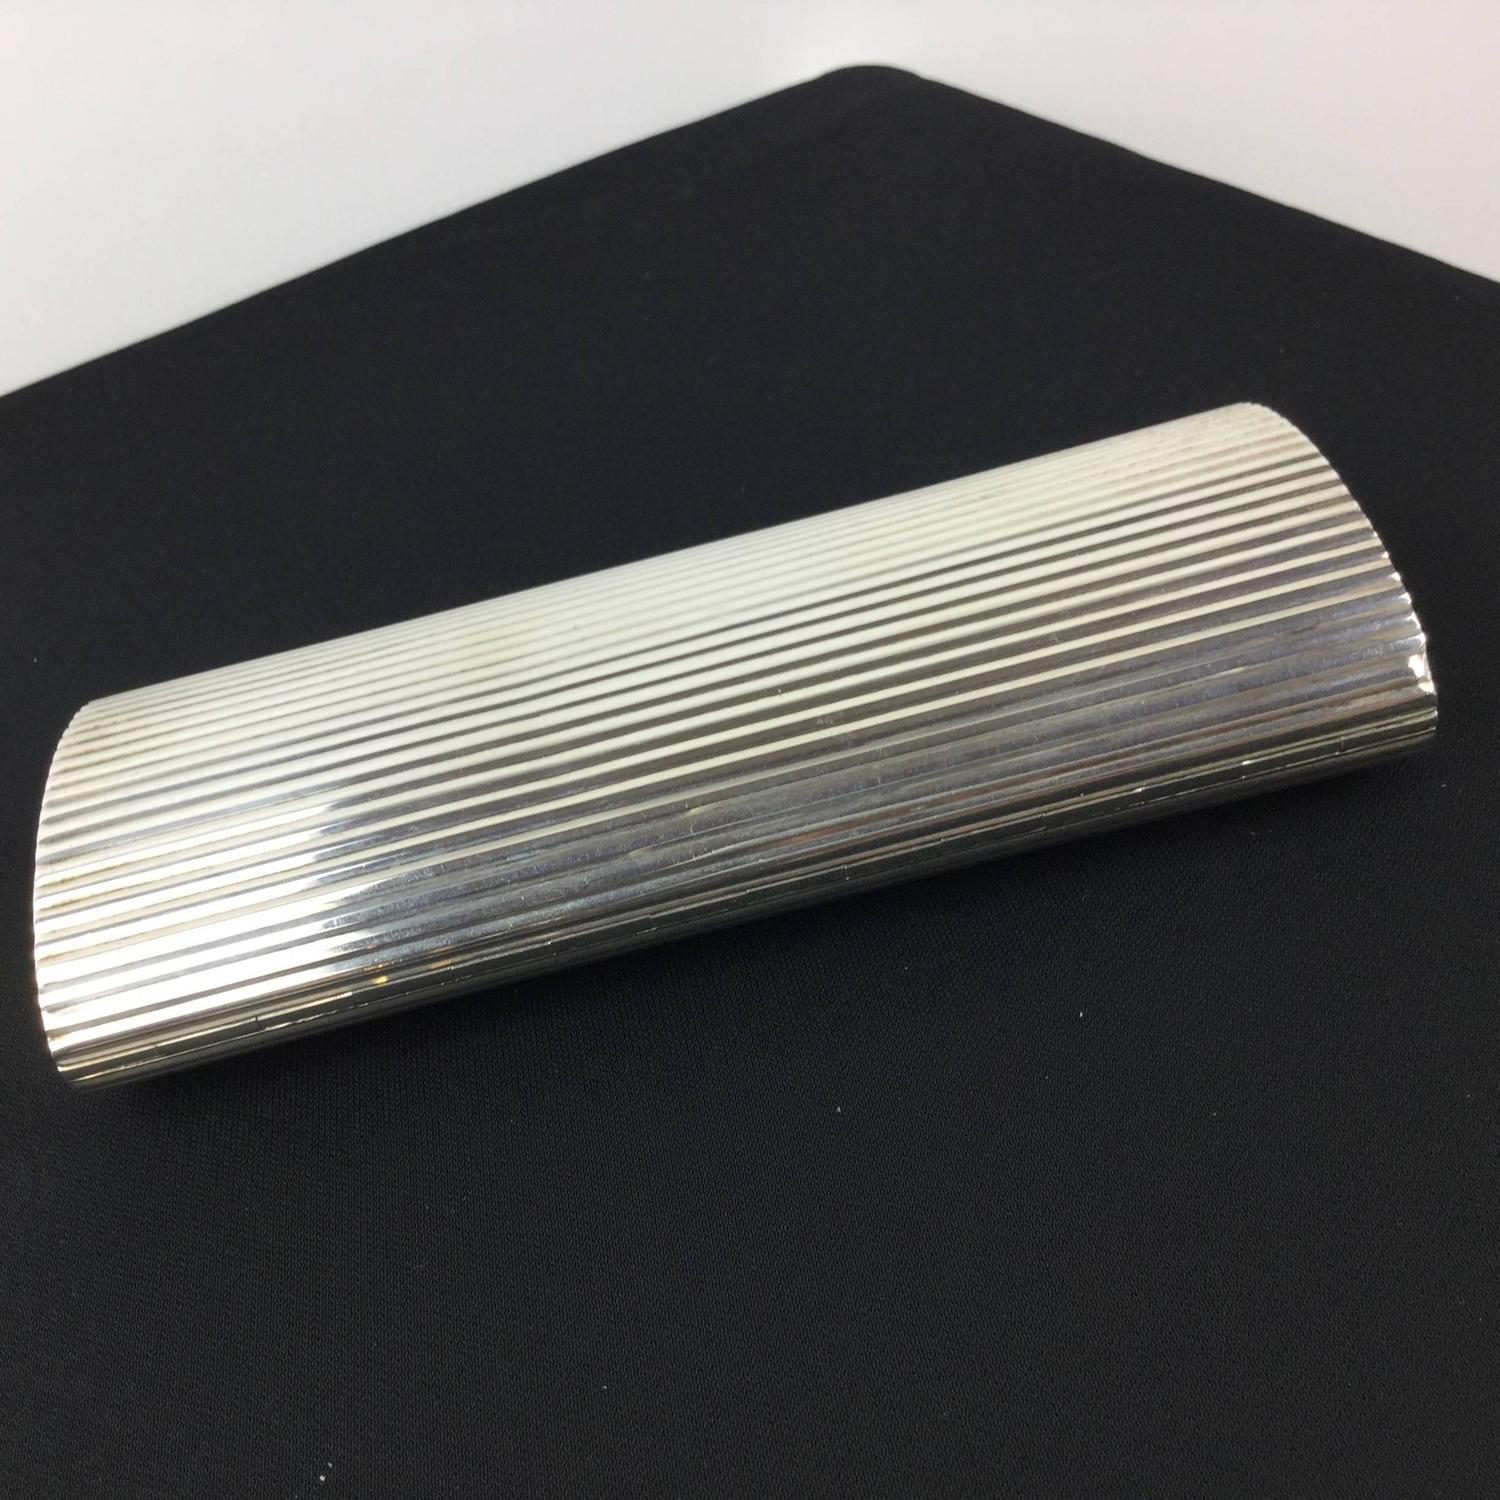 Stunning Gucci Sterling Silver and Enamel Clutch Purse/Minaudière. Deco